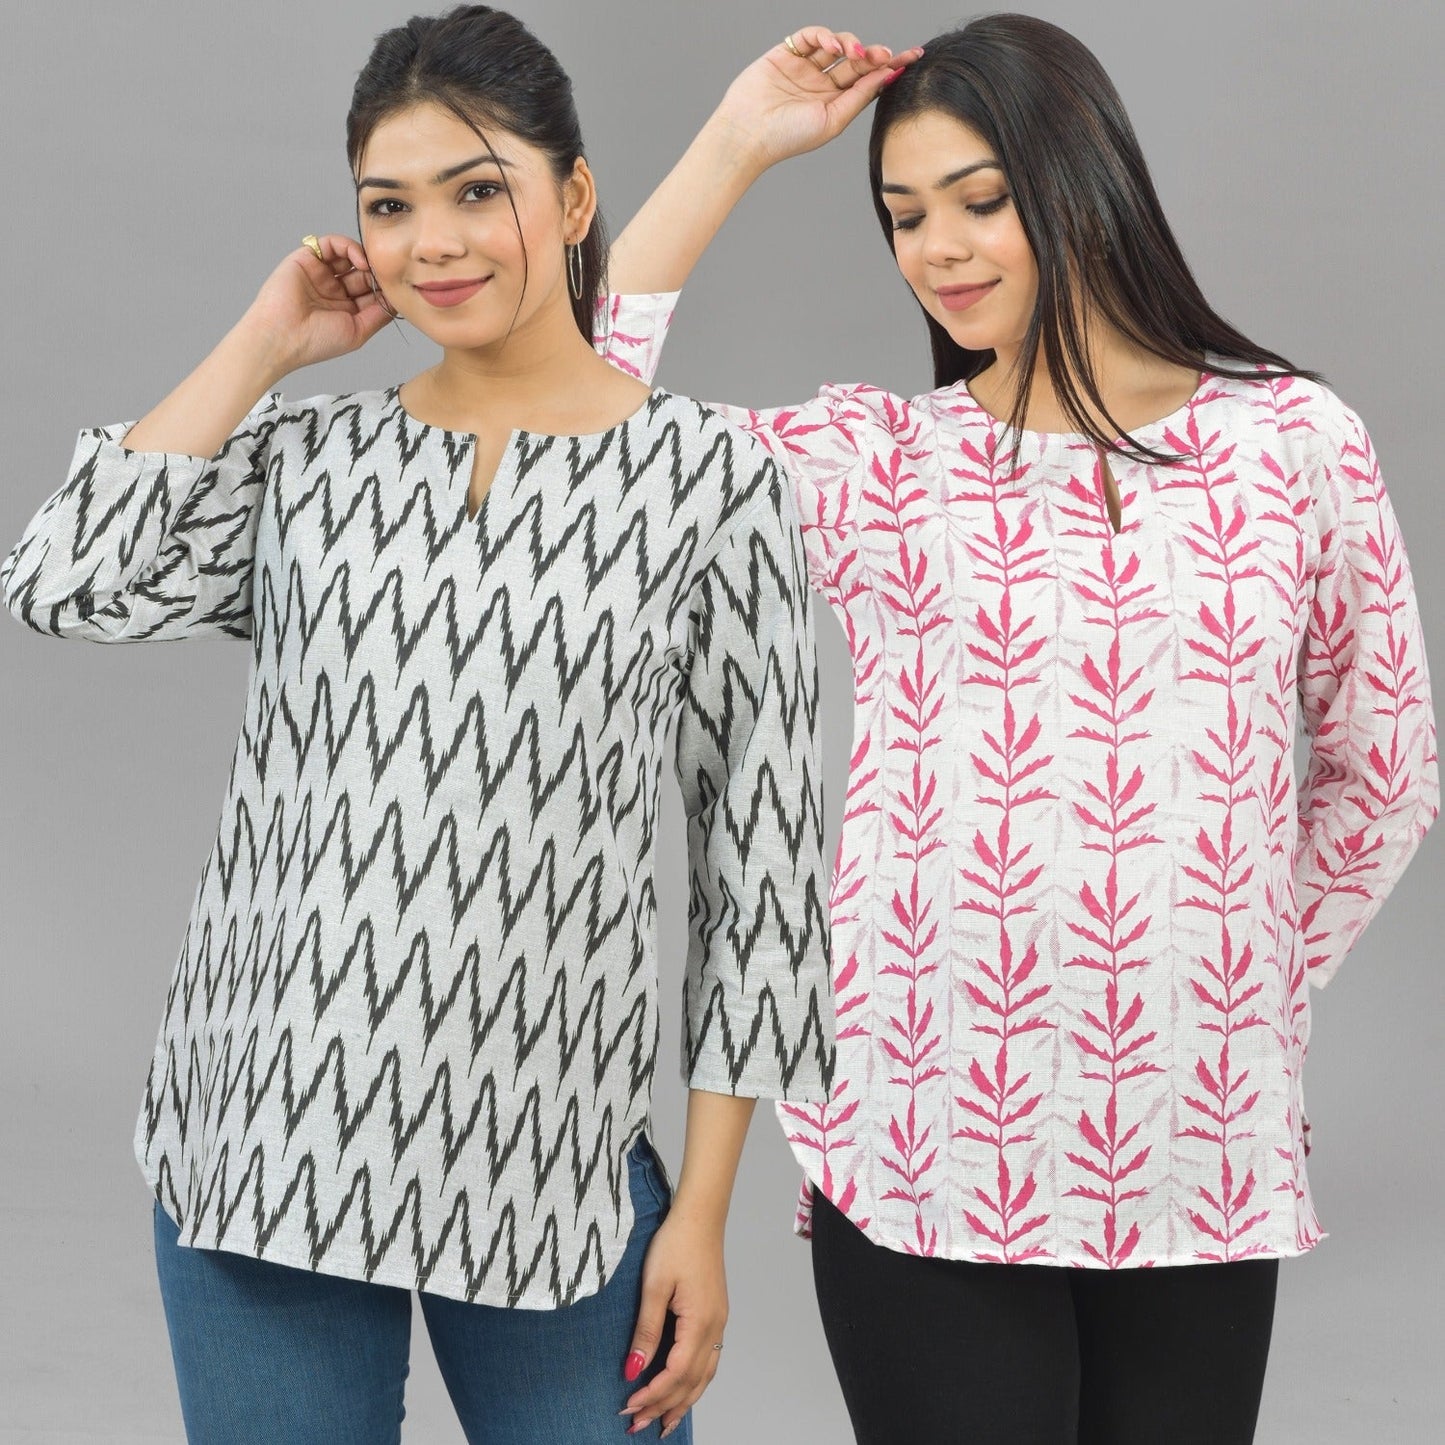 Pack Of 2 Womens Regular Fit Black Zig Zag And Pink Leaf Printed Tops Combo